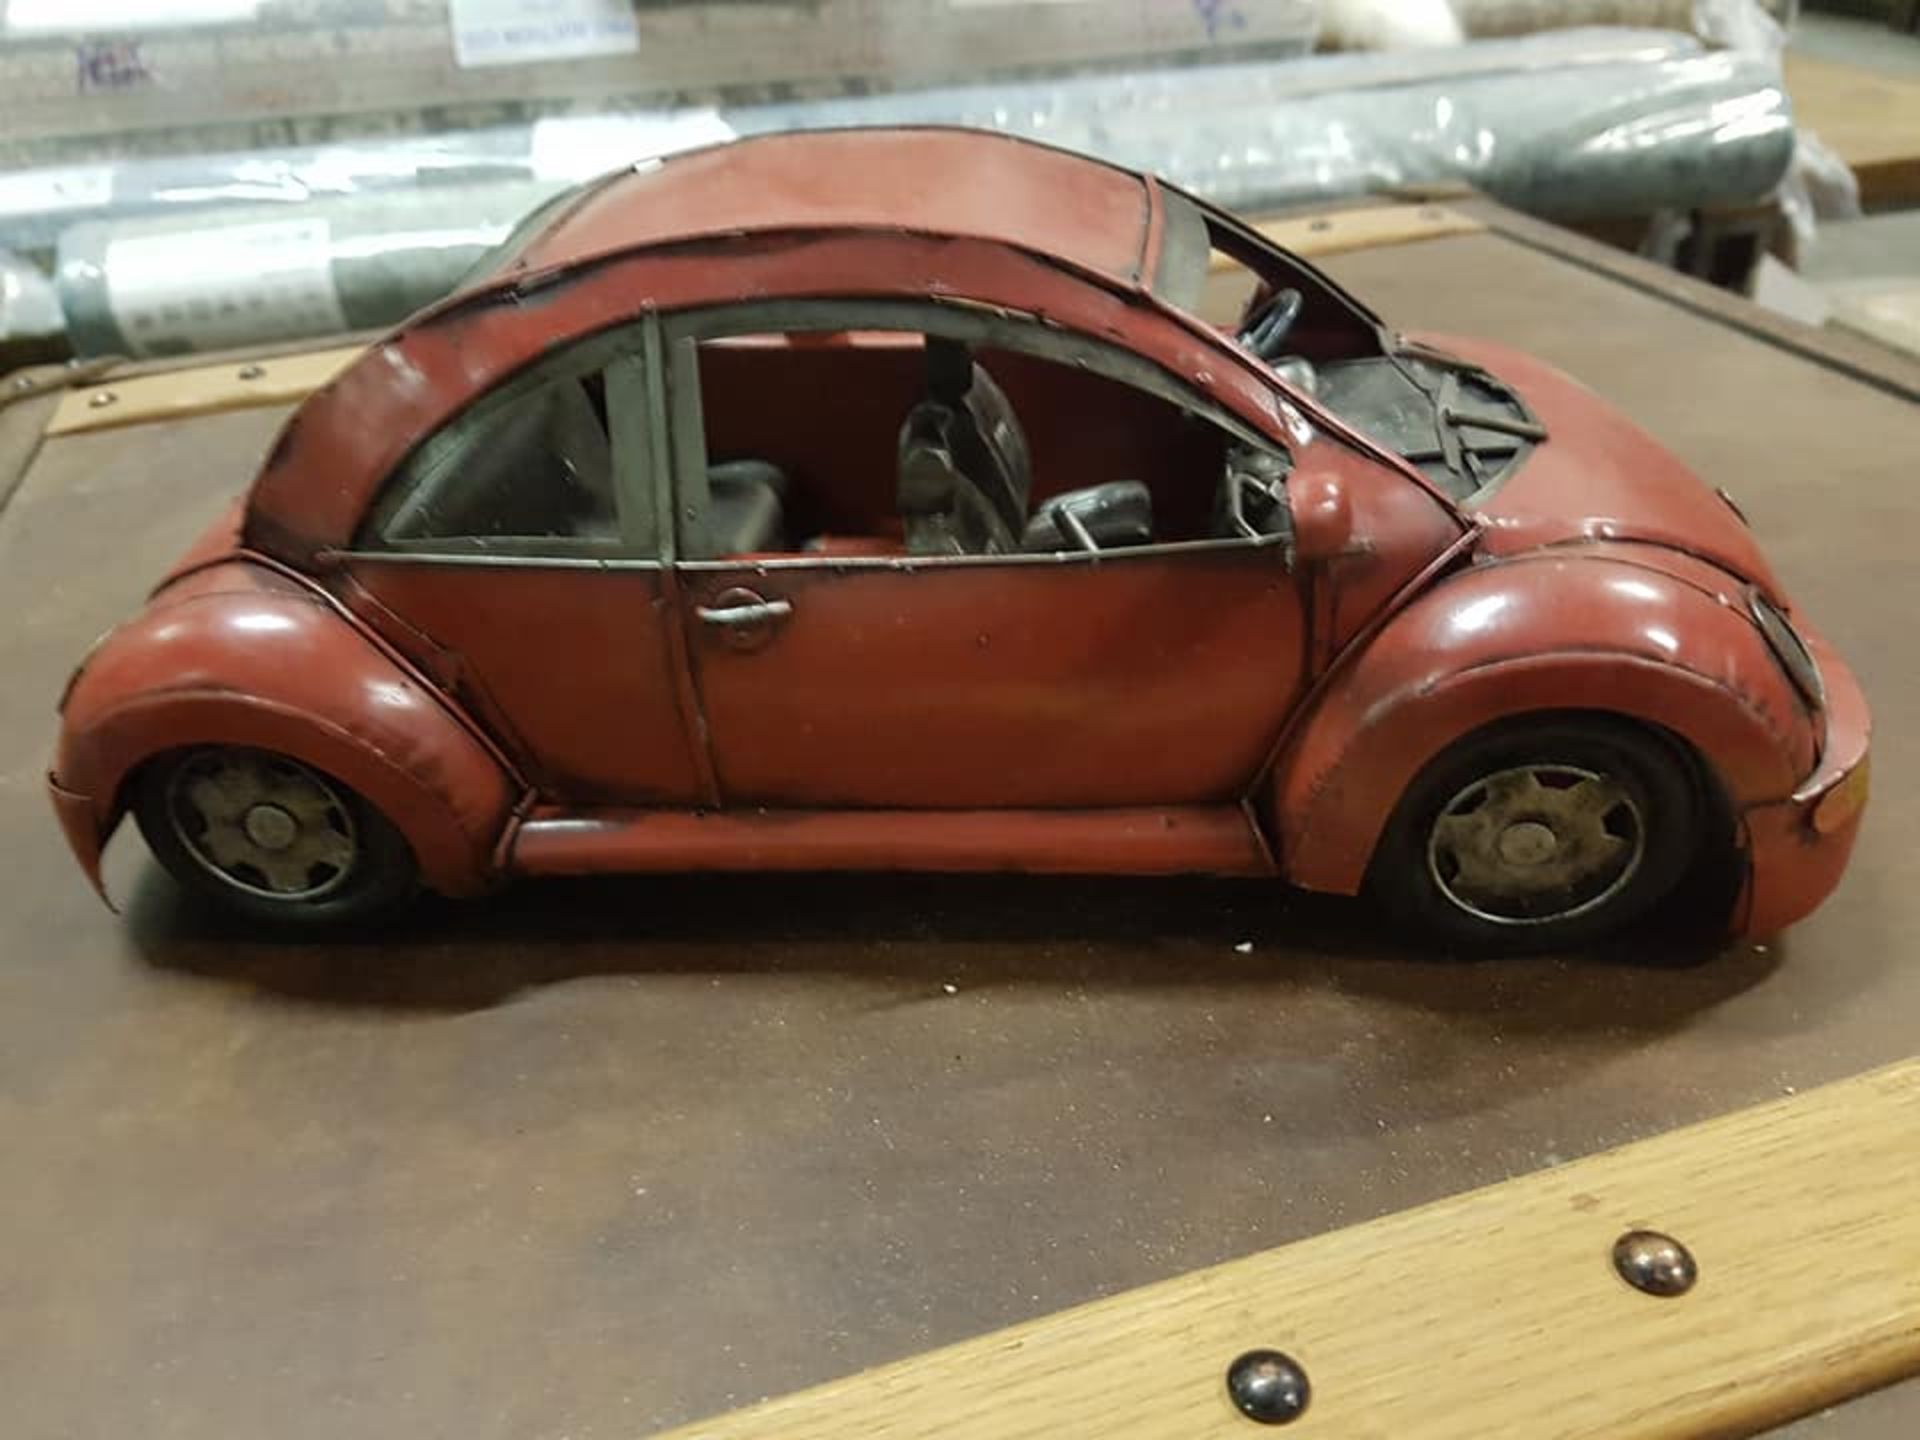 Vintage Red Tin Car 32 x 14 x 12cm RRP £300 - Image 3 of 3